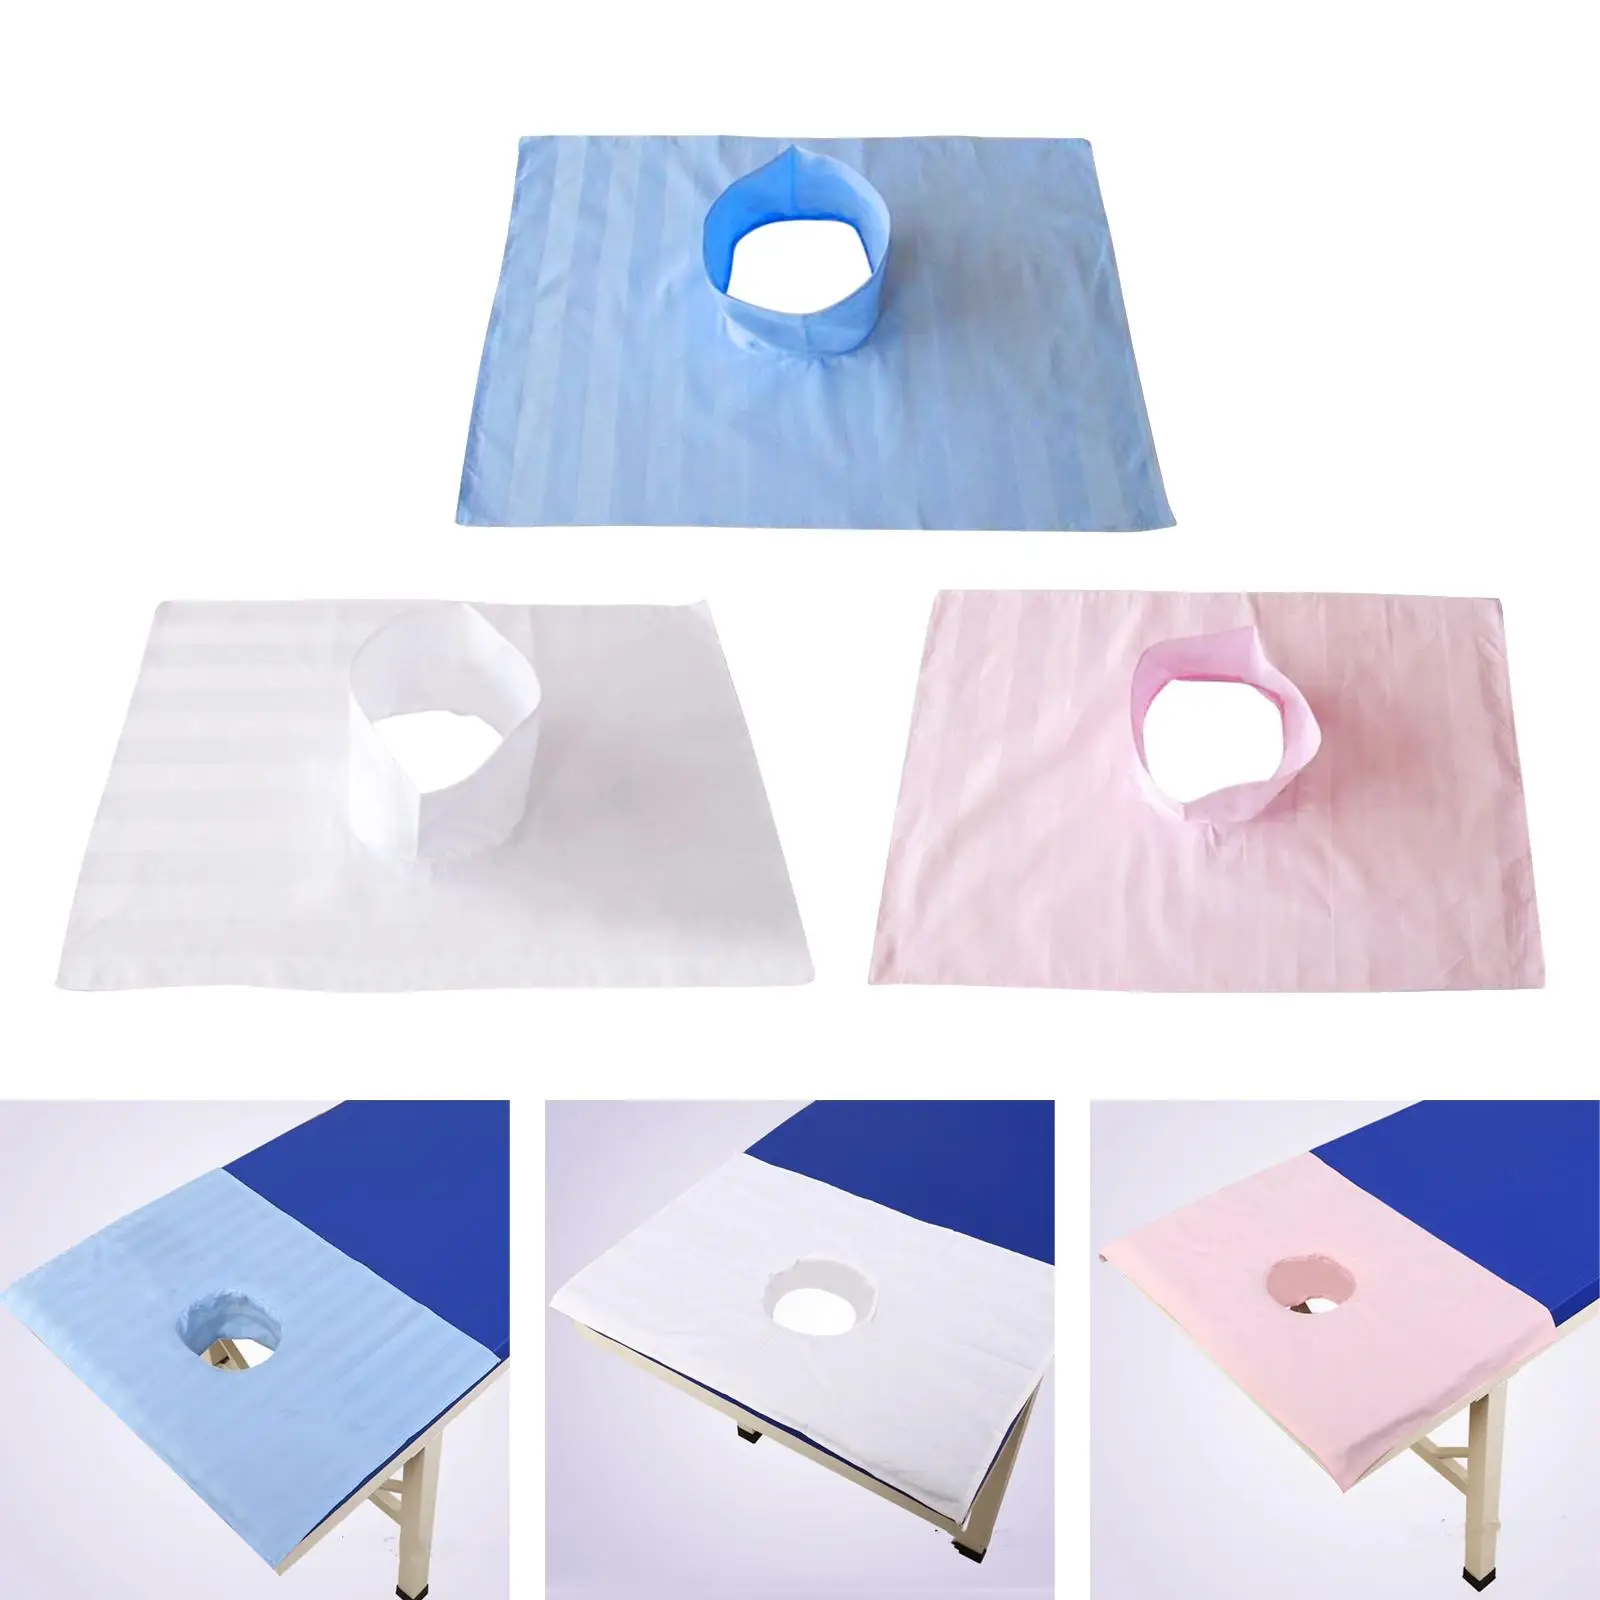 Massage Table Cover Sheet with Face Hole Massage Towel Cotton Massage Bed Sheet Sectional Towelling Cover for Massage Tables